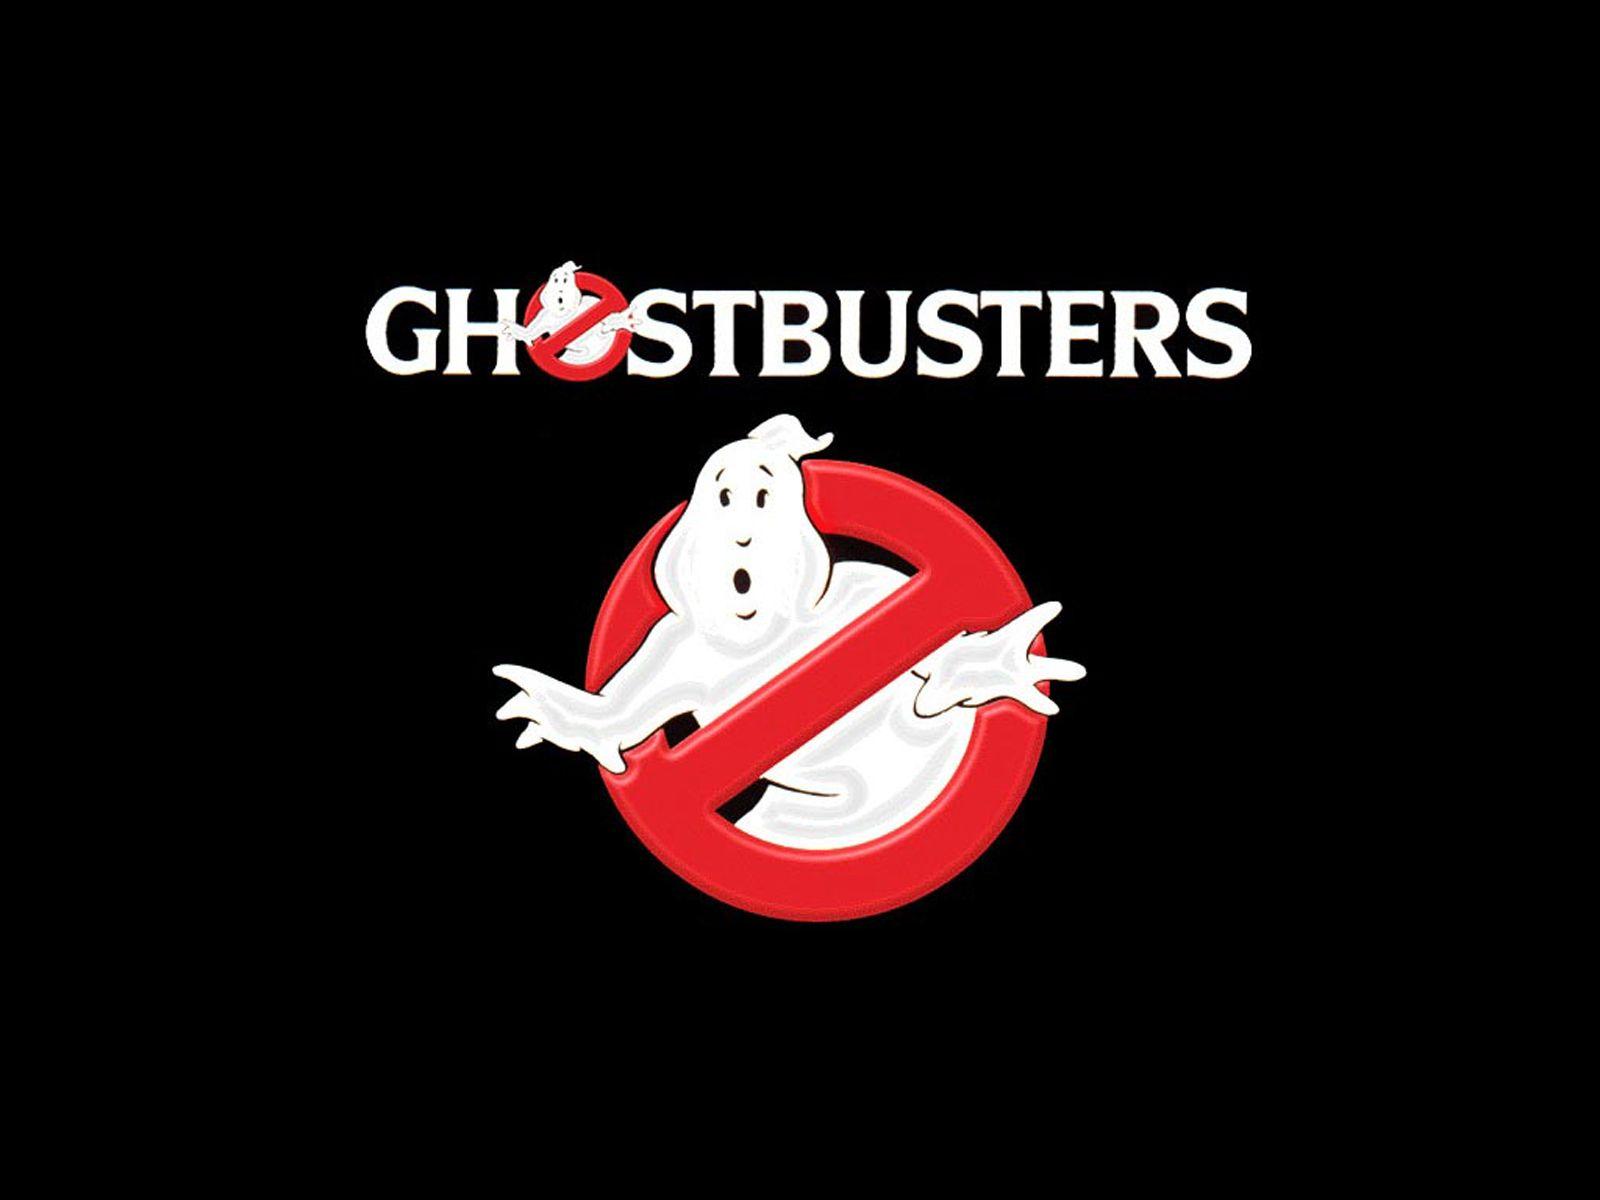 Ghostbusters wallpaper and image, picture, photo